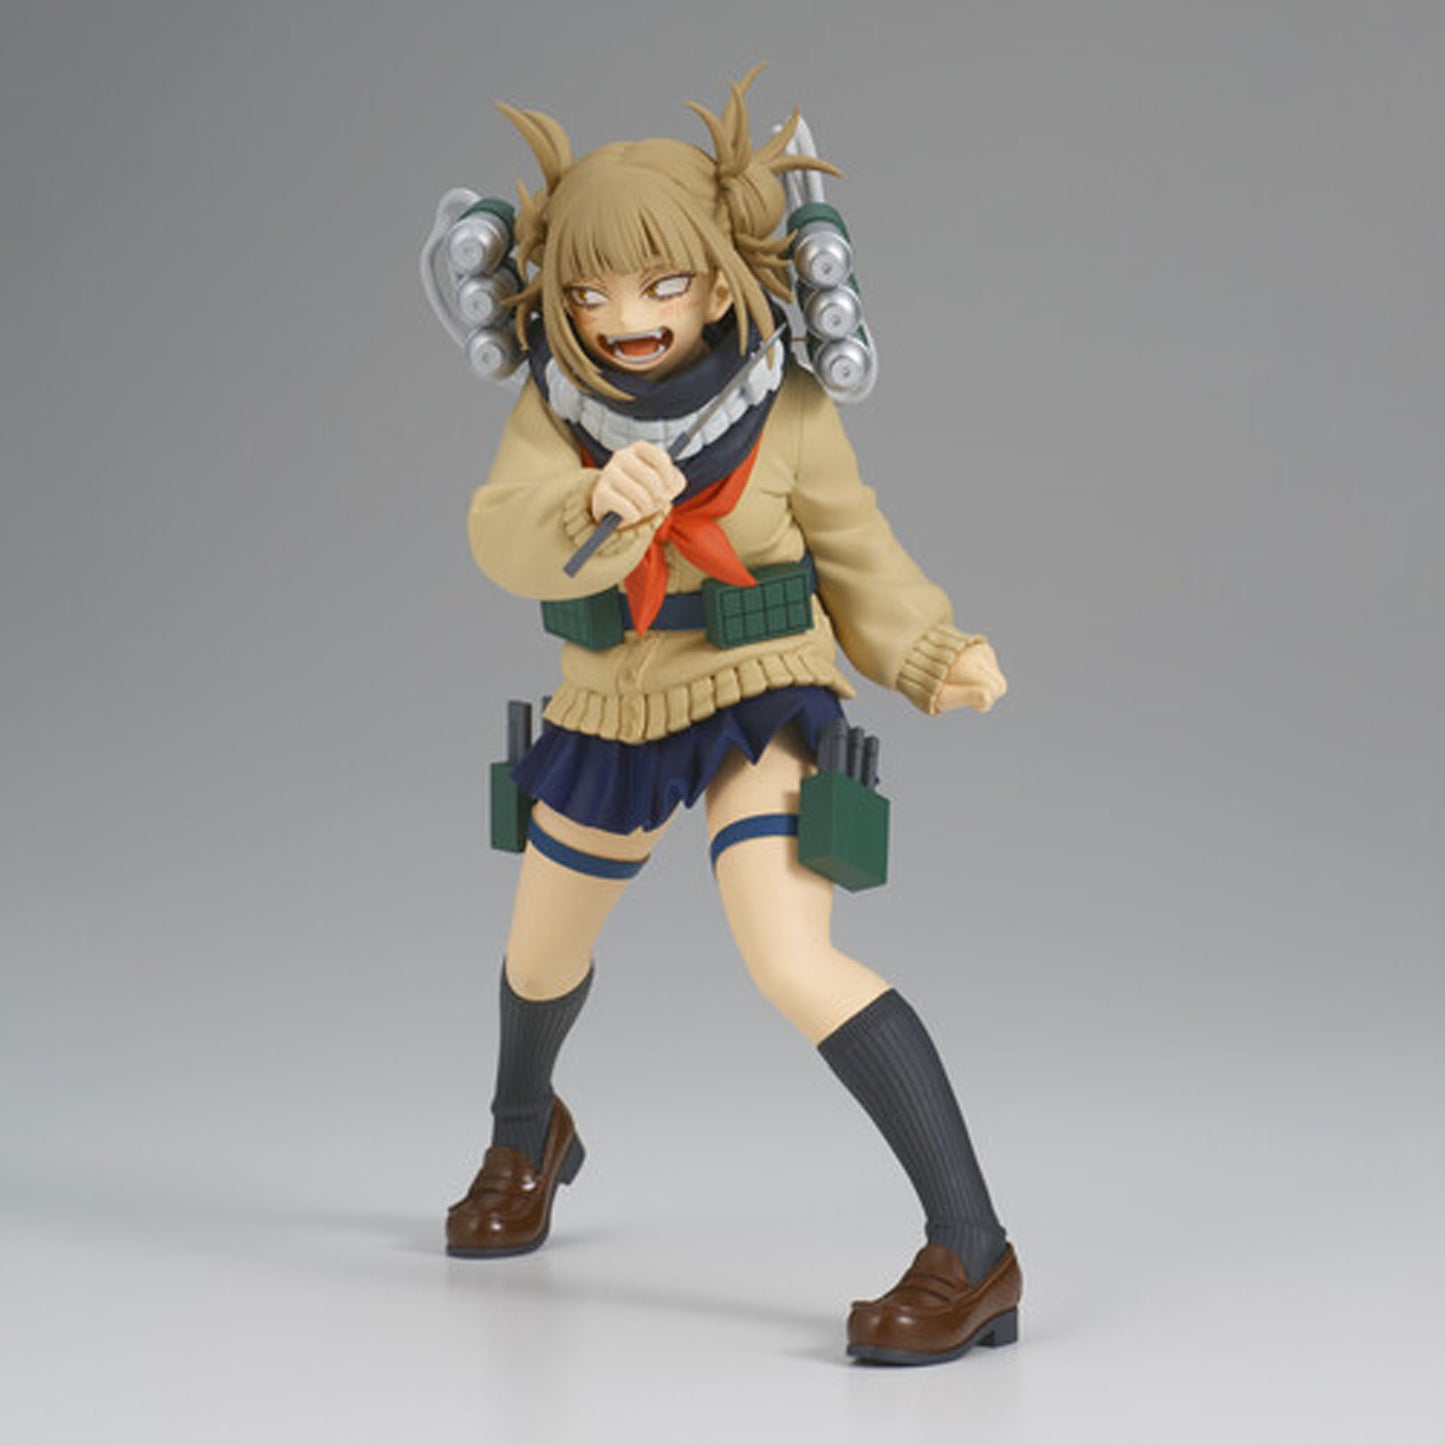 Himiko Toga (My Hero Academia) The Evil Villains DX Statue – Collector's  Outpost